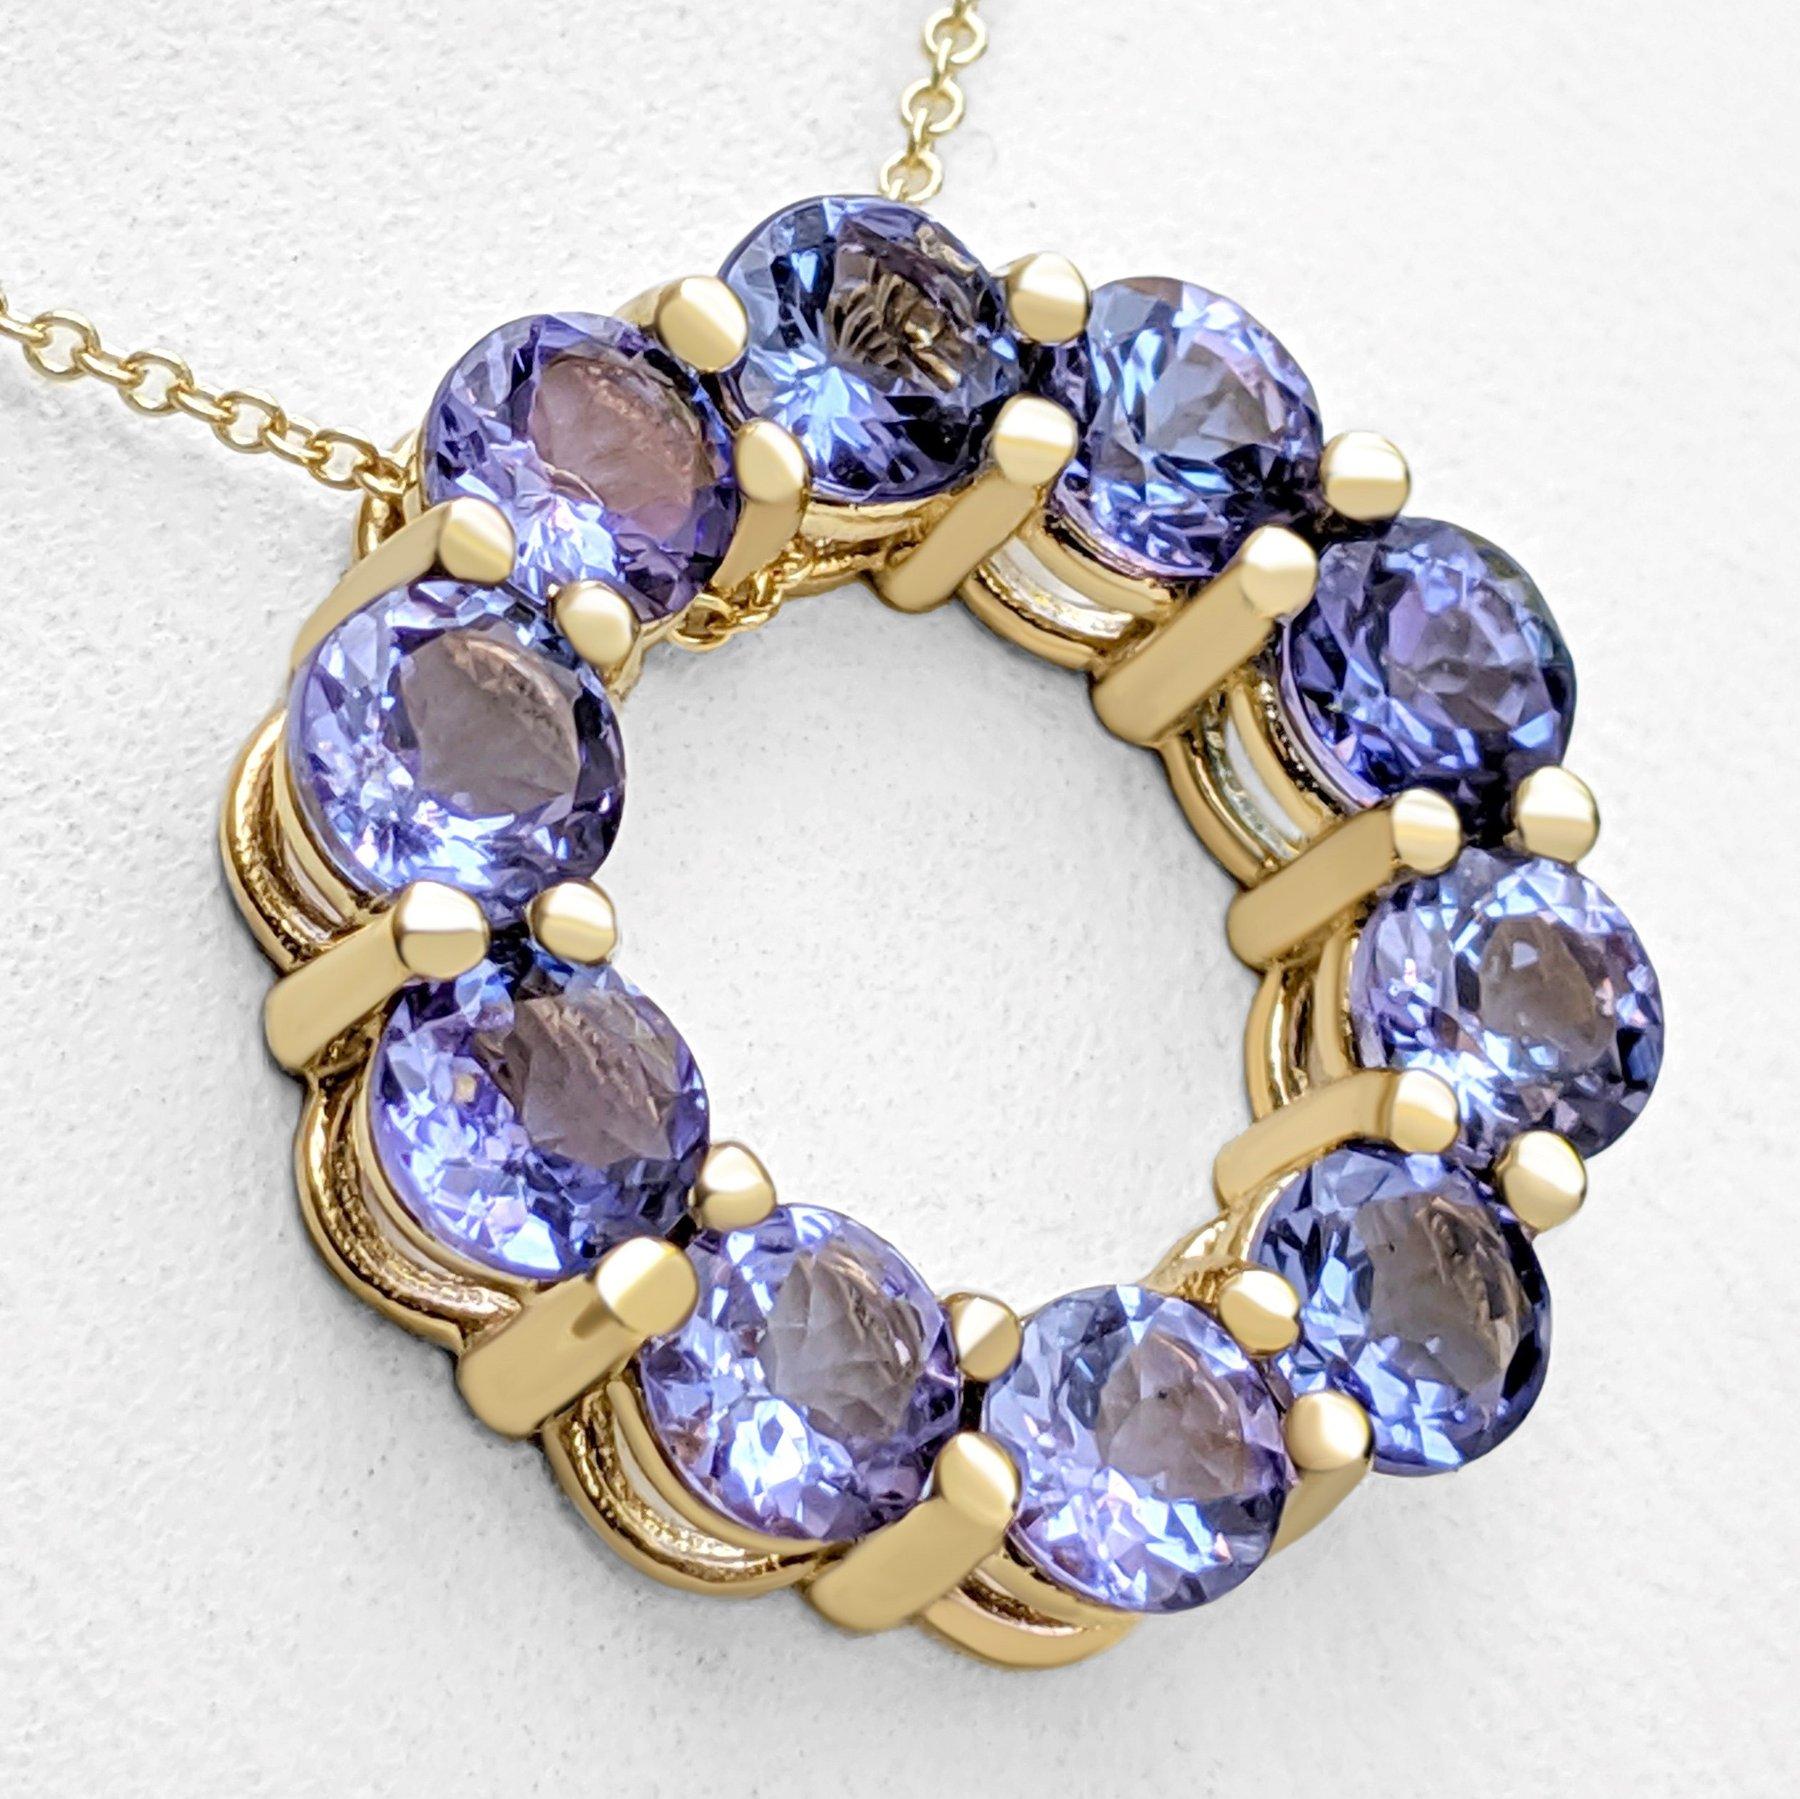 Round Cut NO RESERVE! 5.01 Carat Tanzanite Circle - 14 kt. Yellow Gold - Pendant Necklace For Sale